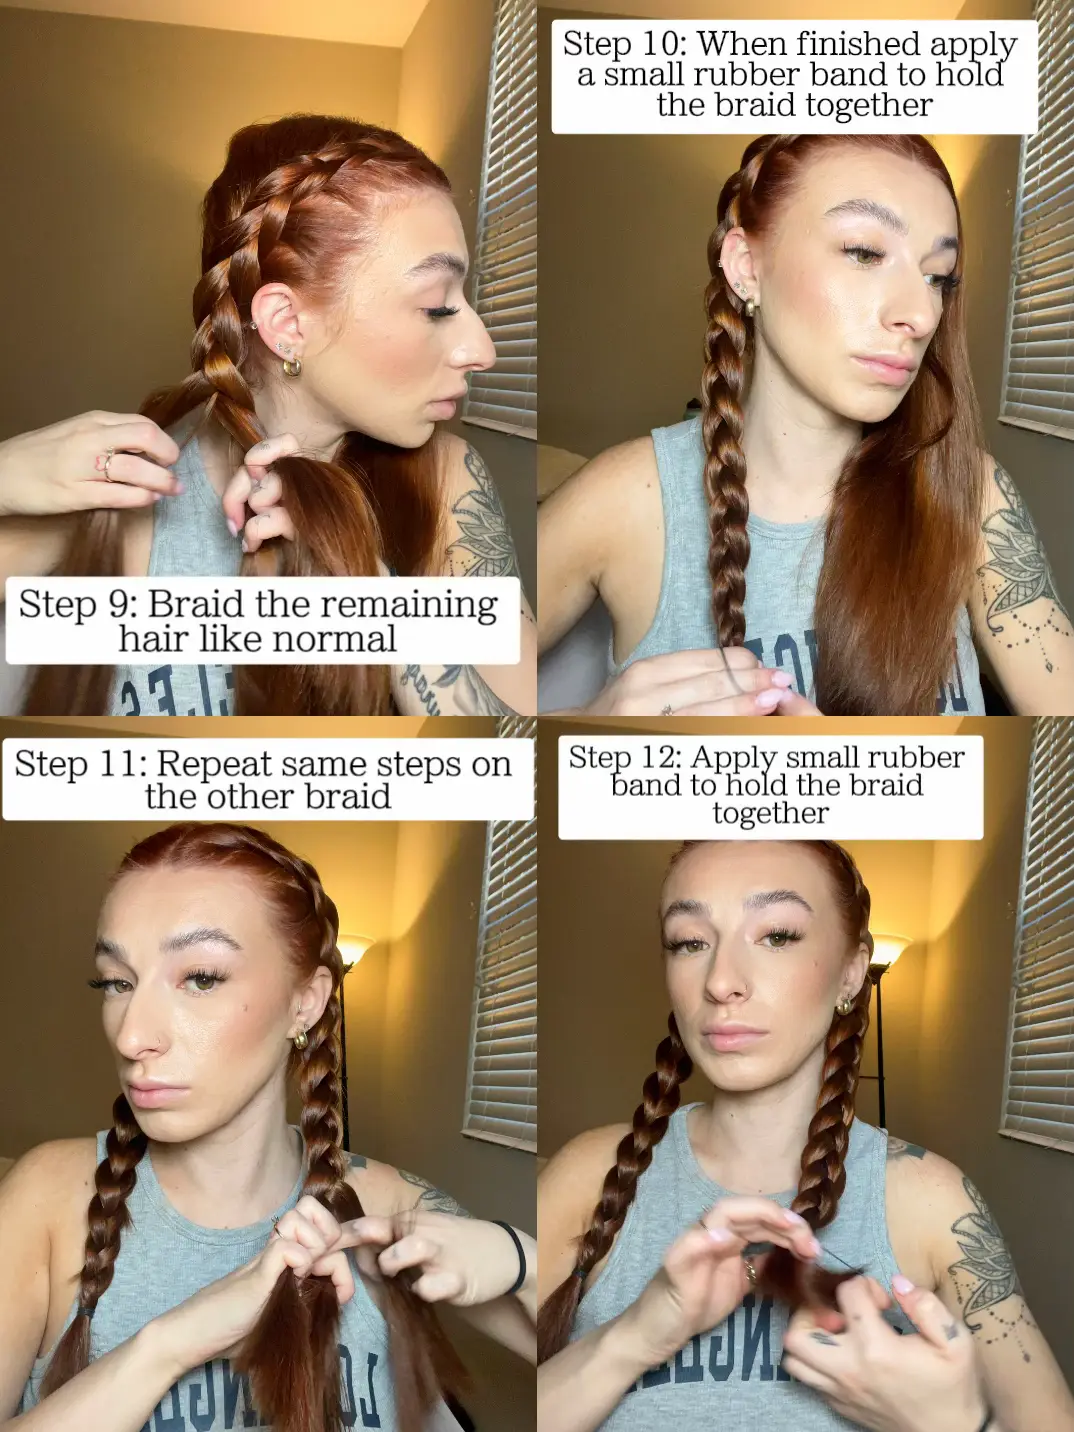 Reverse French Braid Hair How-To Tutorial: Tips From Jennifer